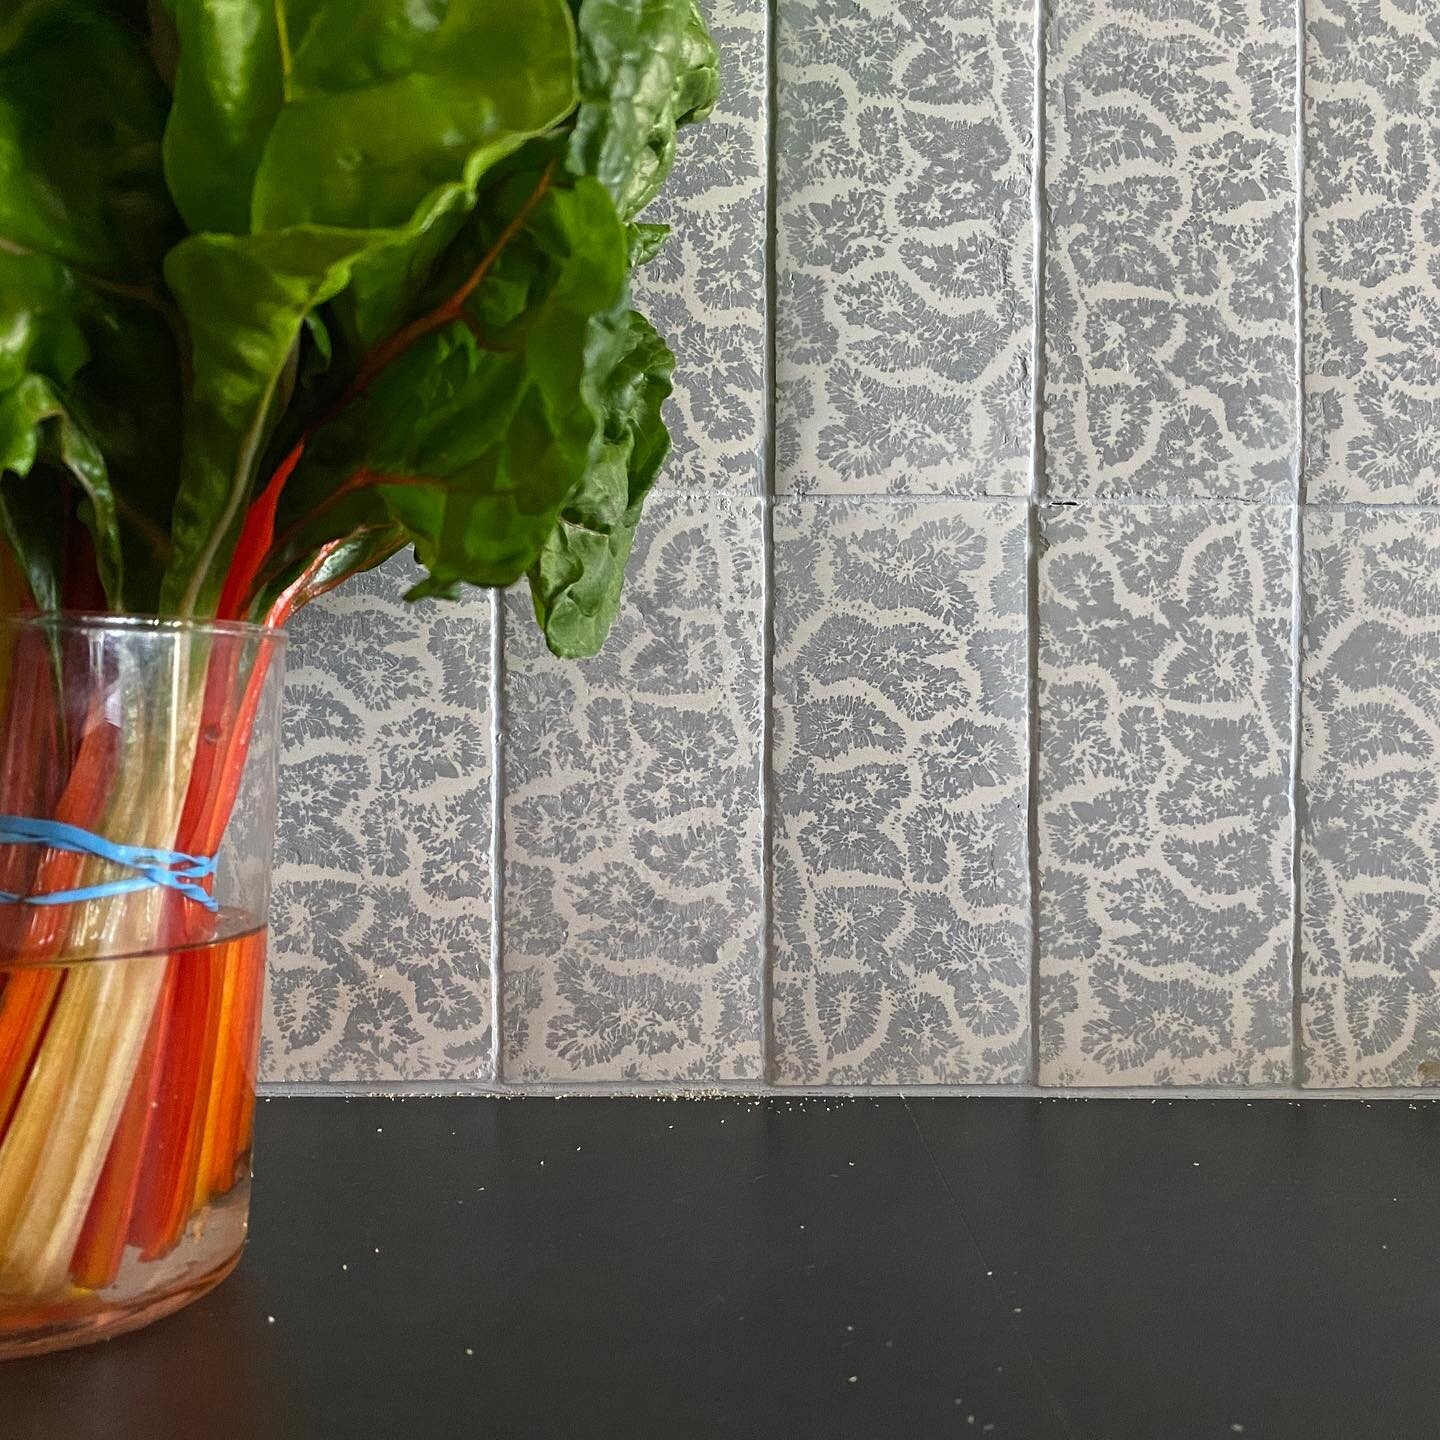 Capture of Interior project. Coral imprinted tile in kitchen. SF pied-&agrave;-terre. Details matter.
.
.
.
.
.
.
#interiordesign #interiorphotography #details #tile #coral #tidepool #kitchen #photoshoot #photography #rainbowchard